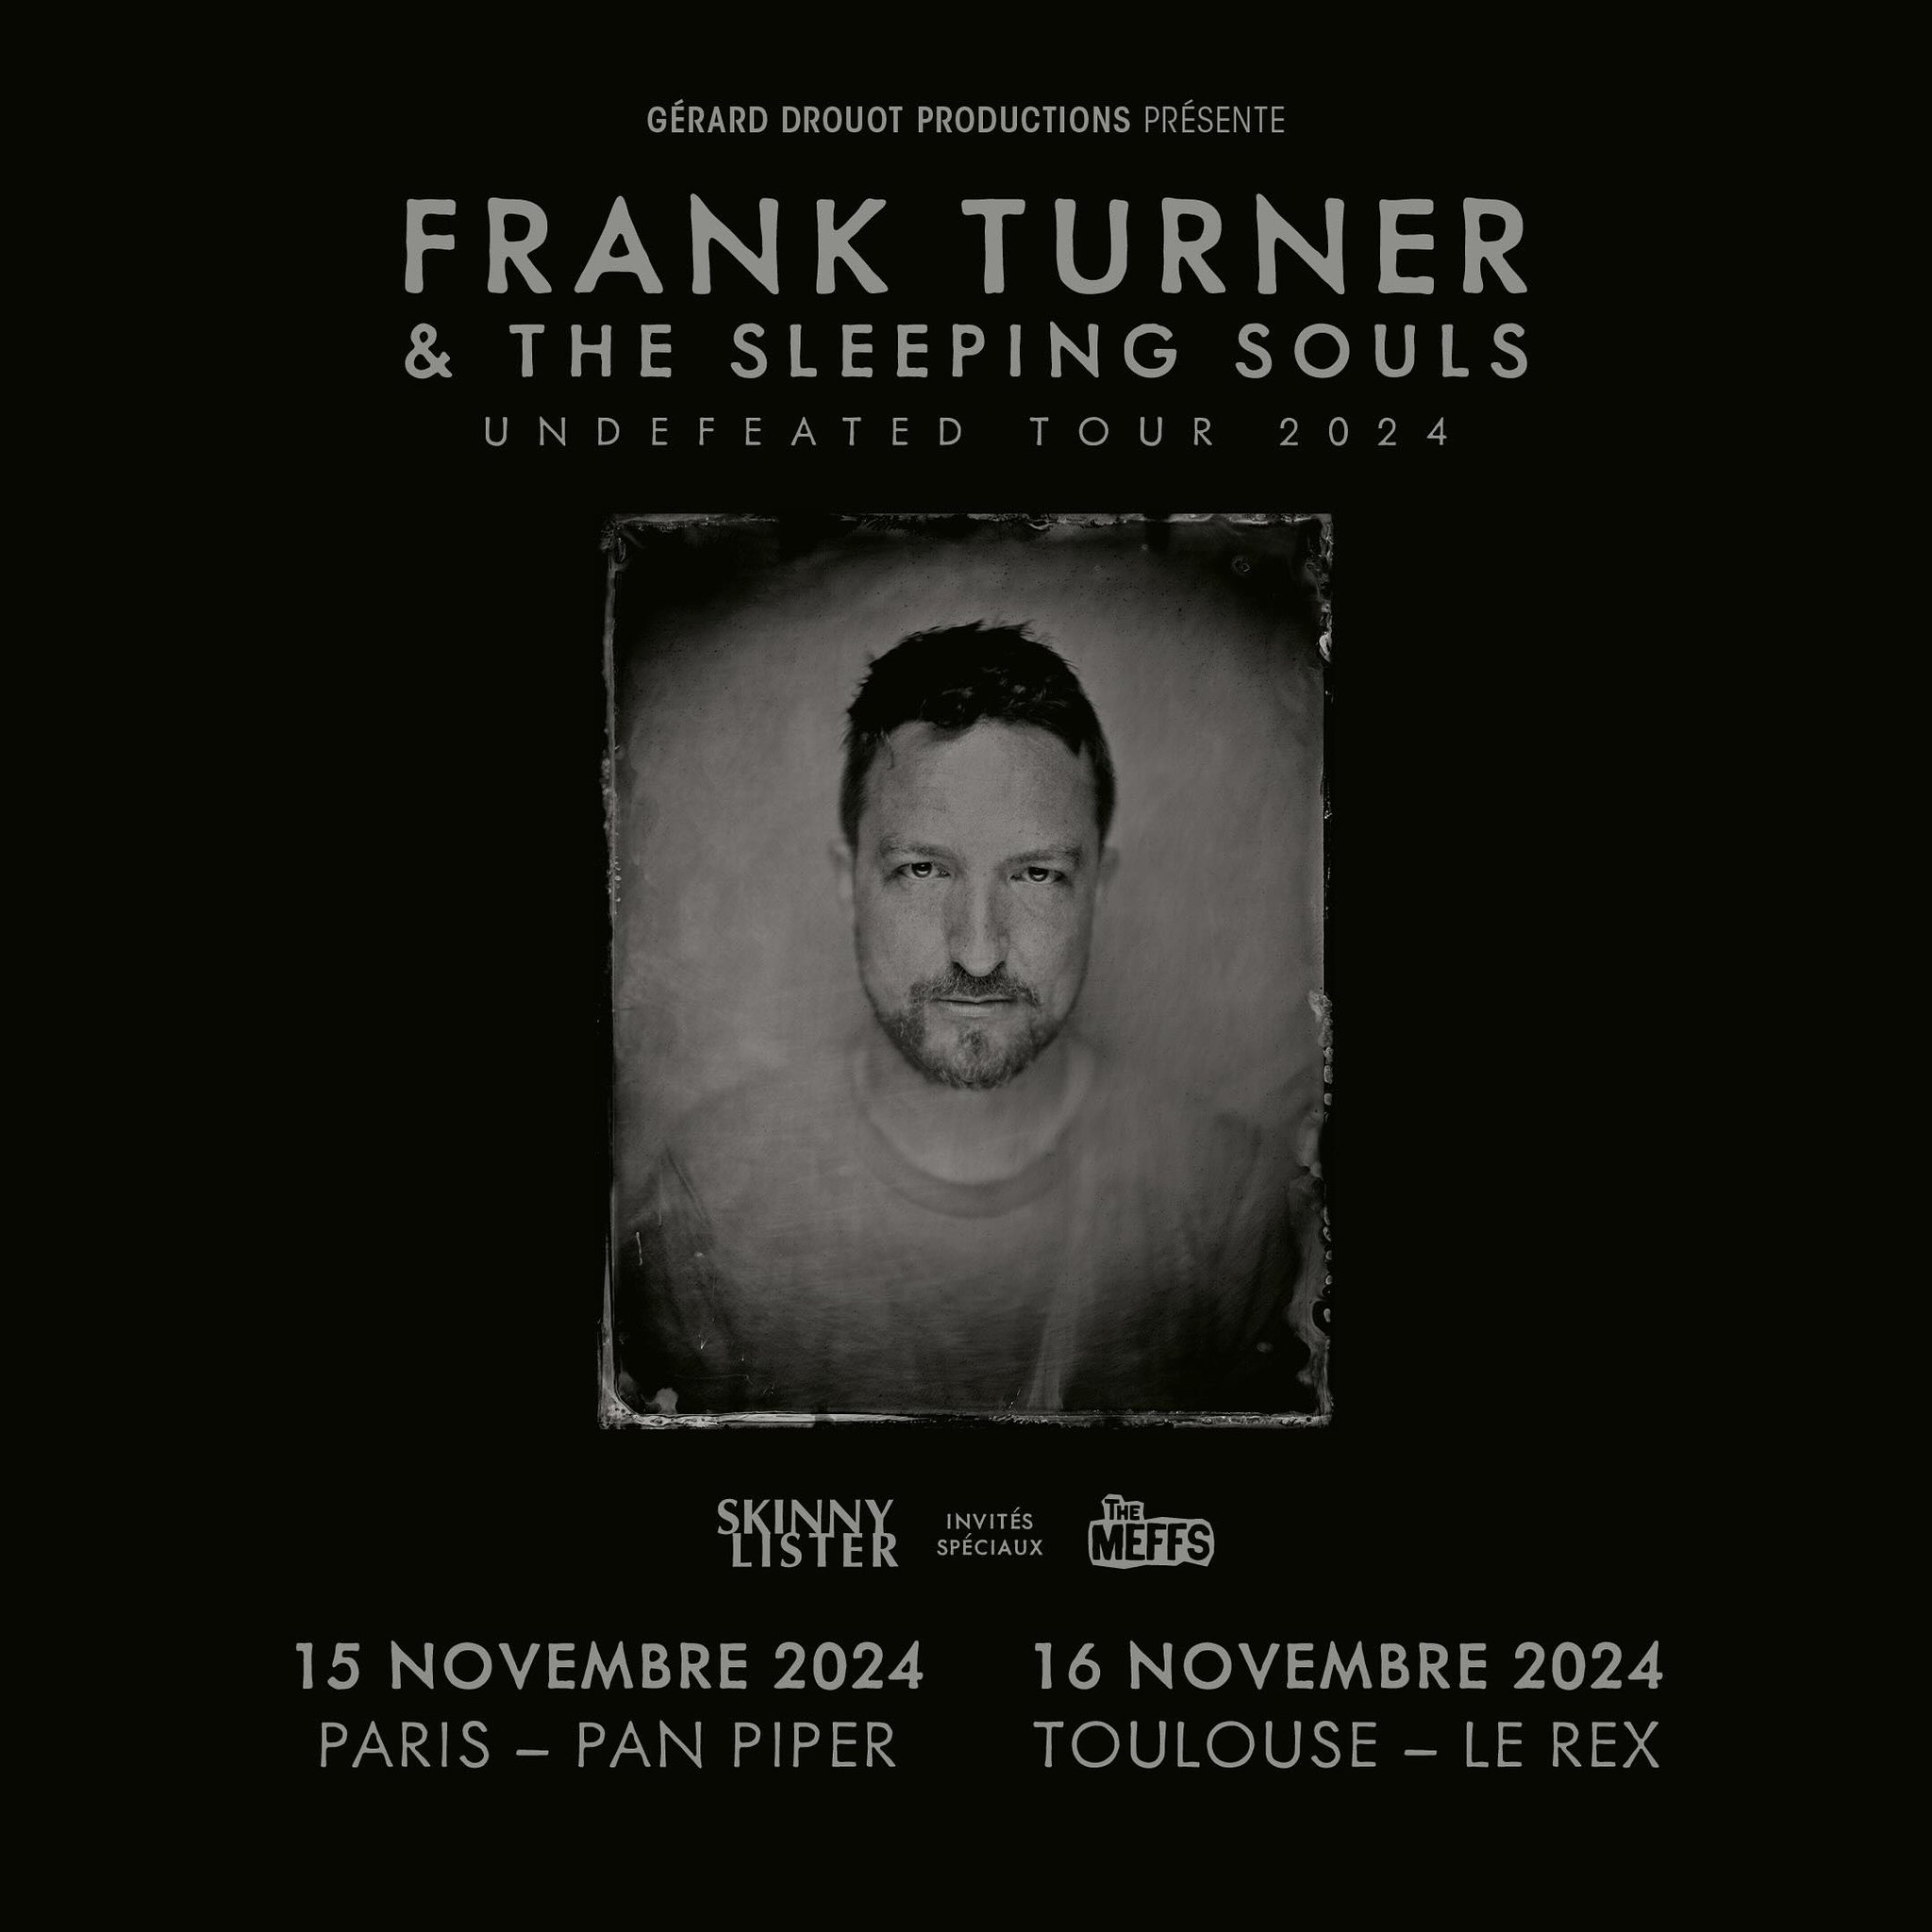 Frank Turner and The Sleeping Souls en Le Rex de Toulouse Tickets